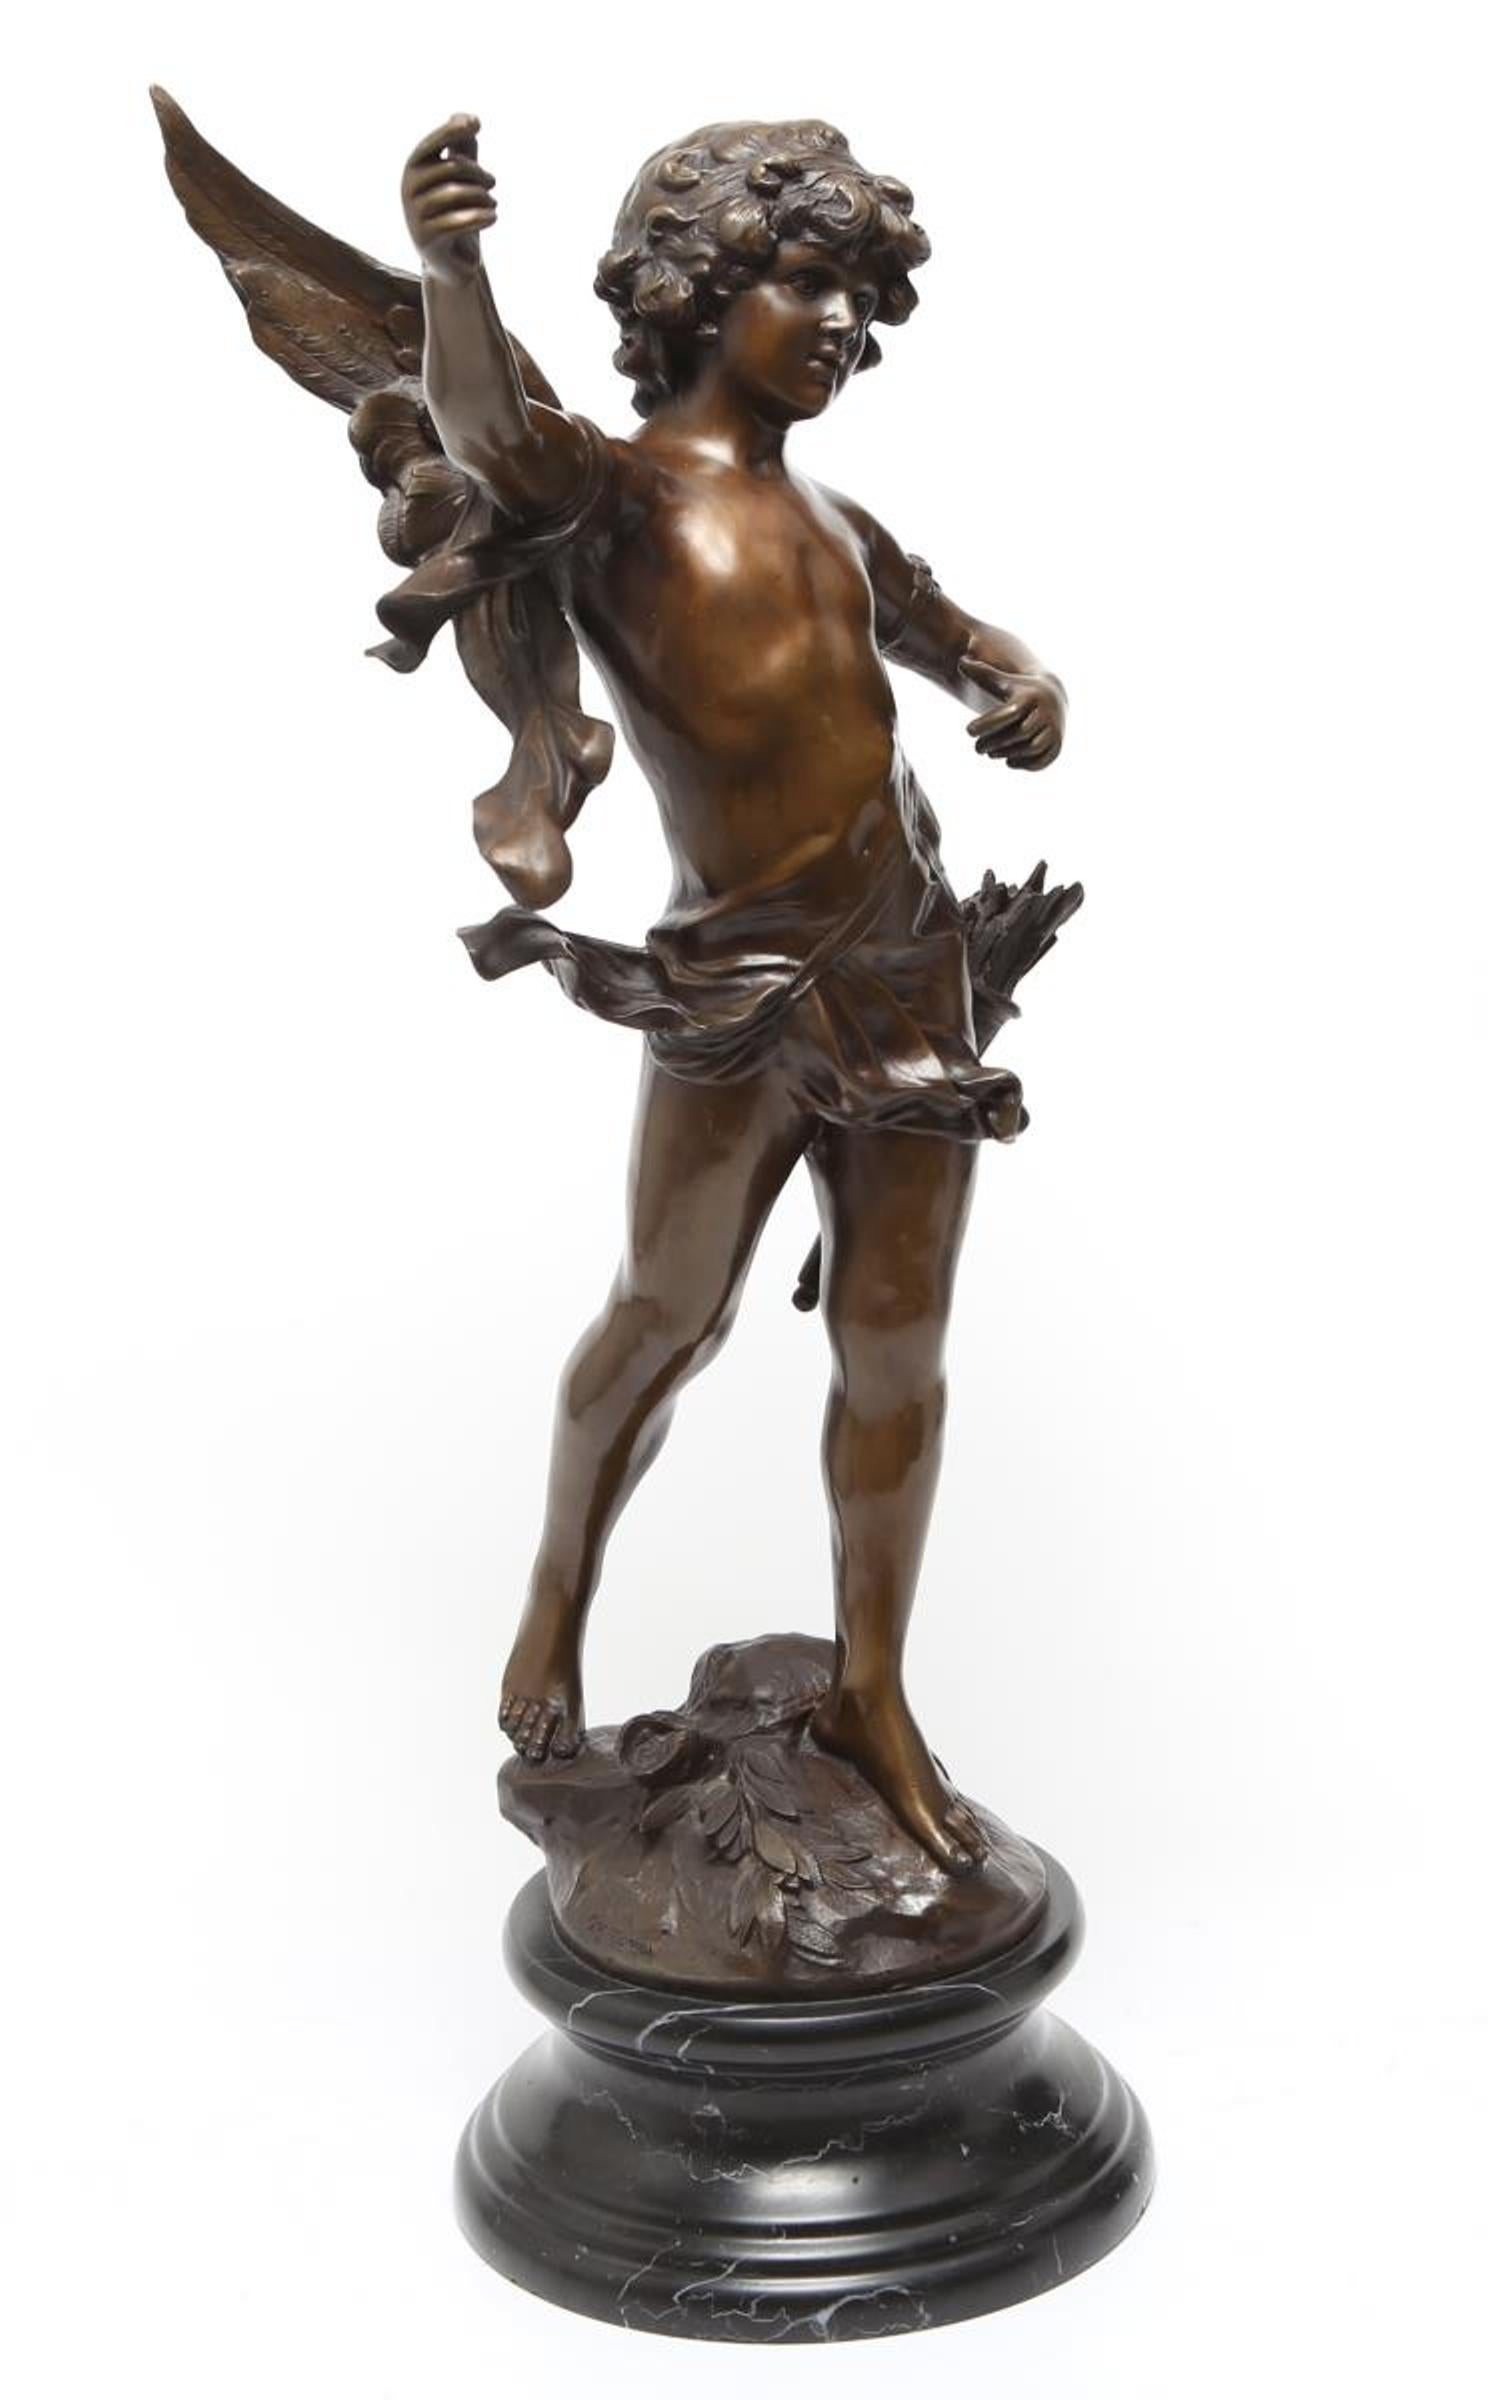 French neoclassical revival 'Cupidon' bronze sculpture after French artist Auguste Moreau (1834-1917), depicting the winged god of love with quiver of arrows on a laurel leaf base, atop a shaped black marble base. The sculpture itself was never cast